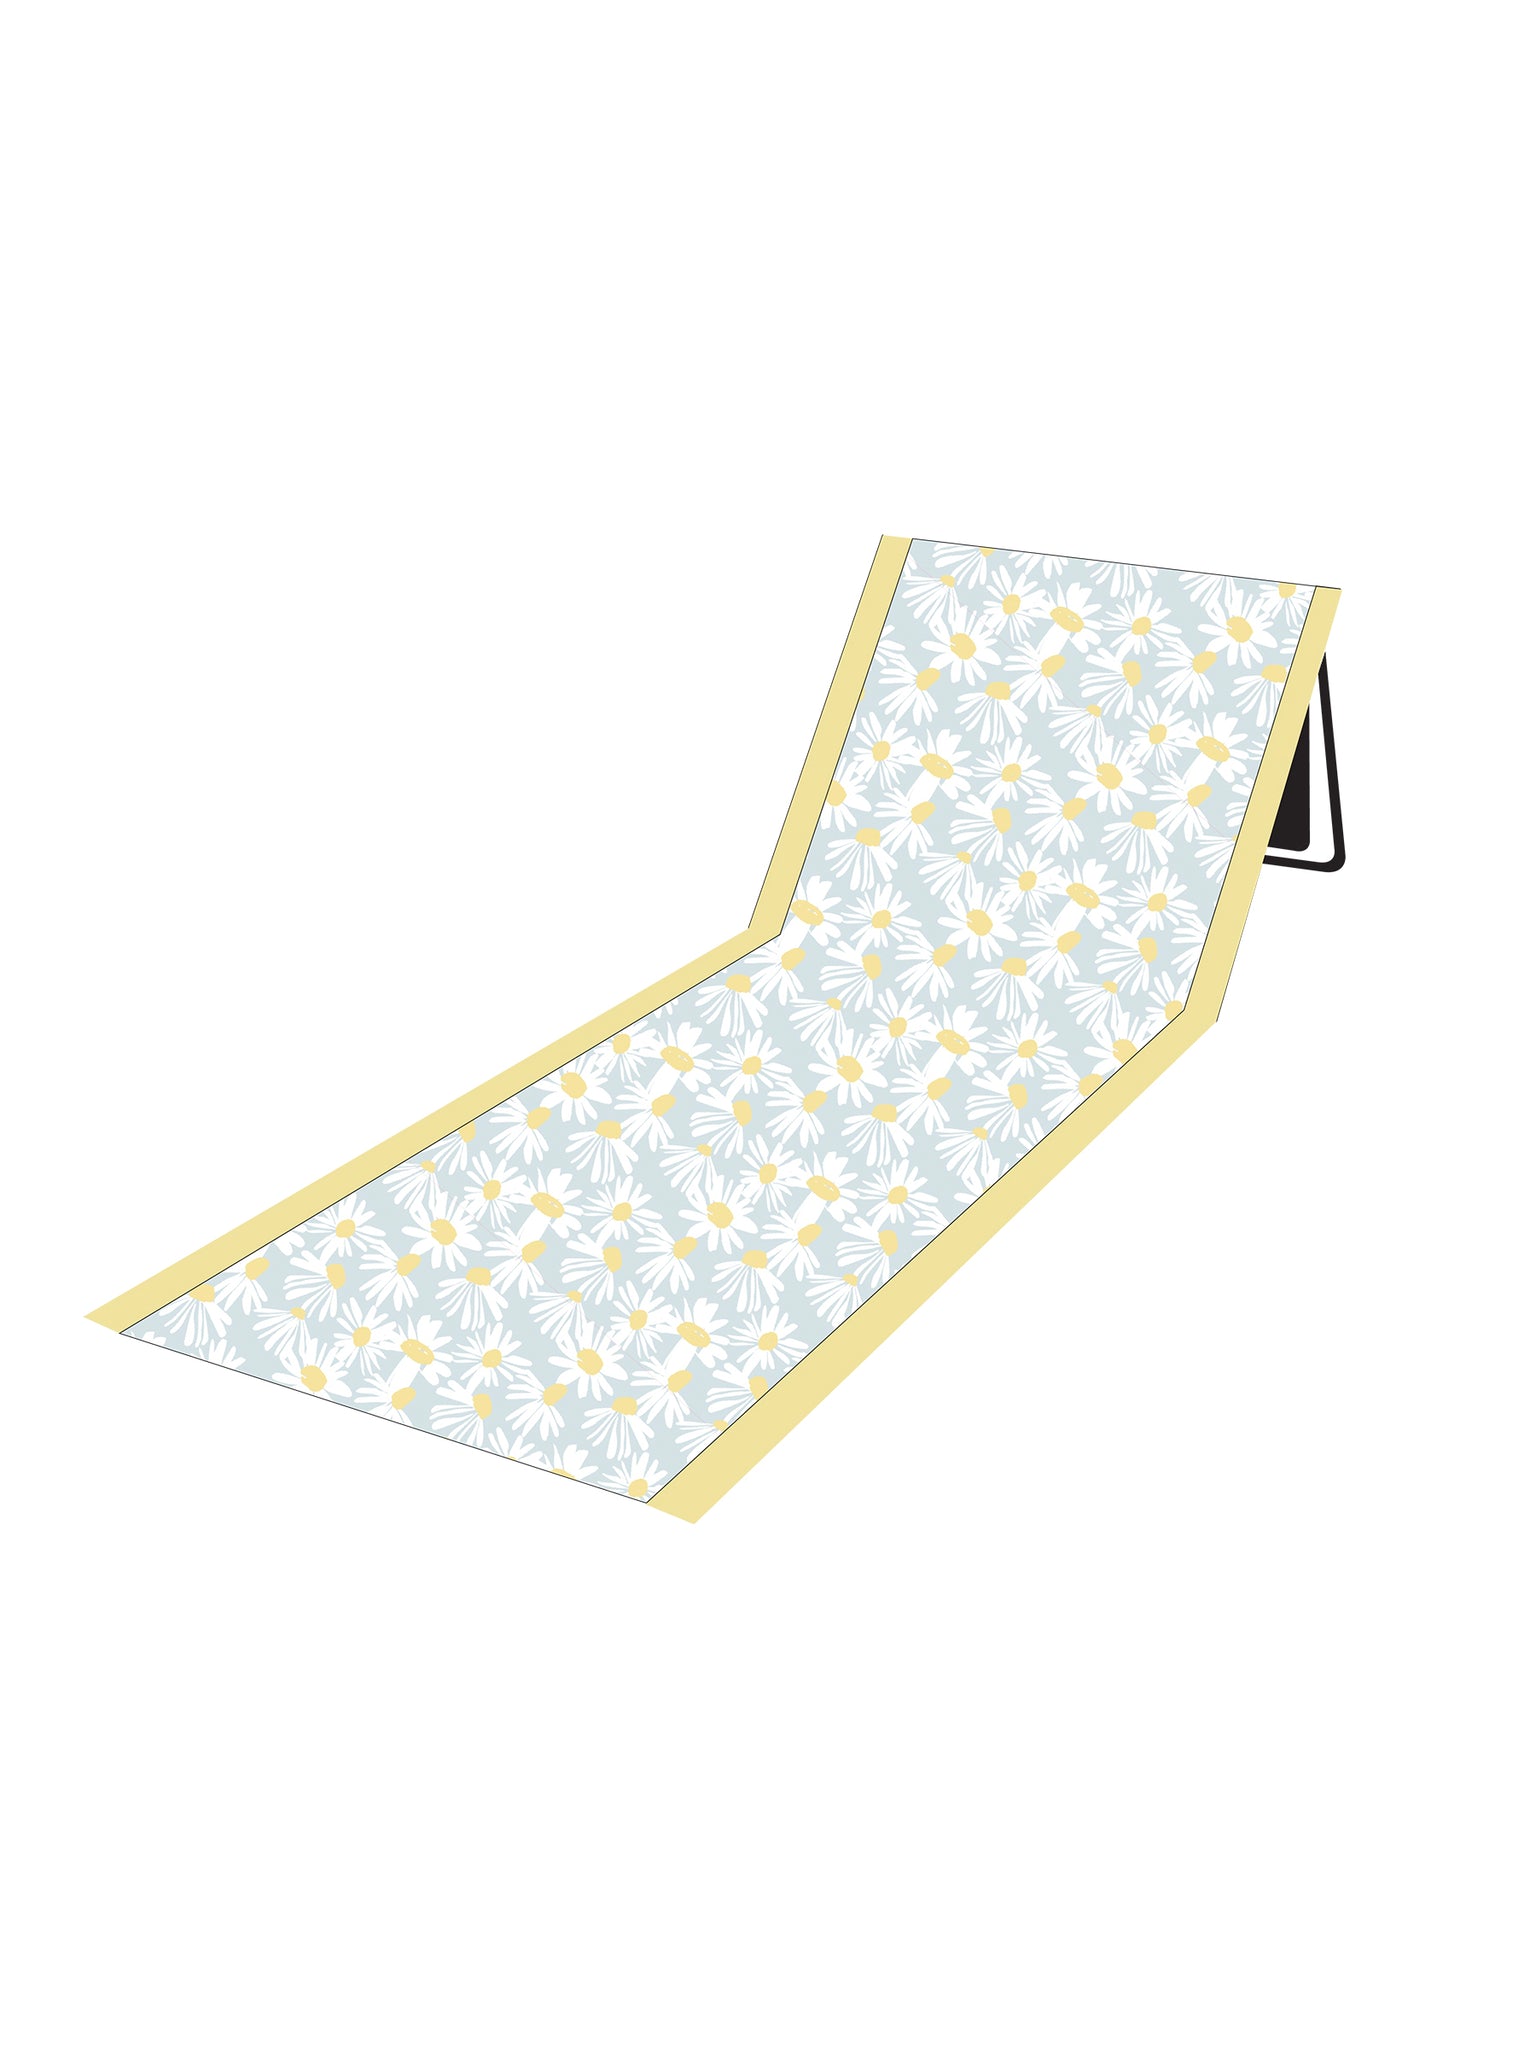 Simply Southern Beach Lounger - *CHOOSE YOUR STYLE*